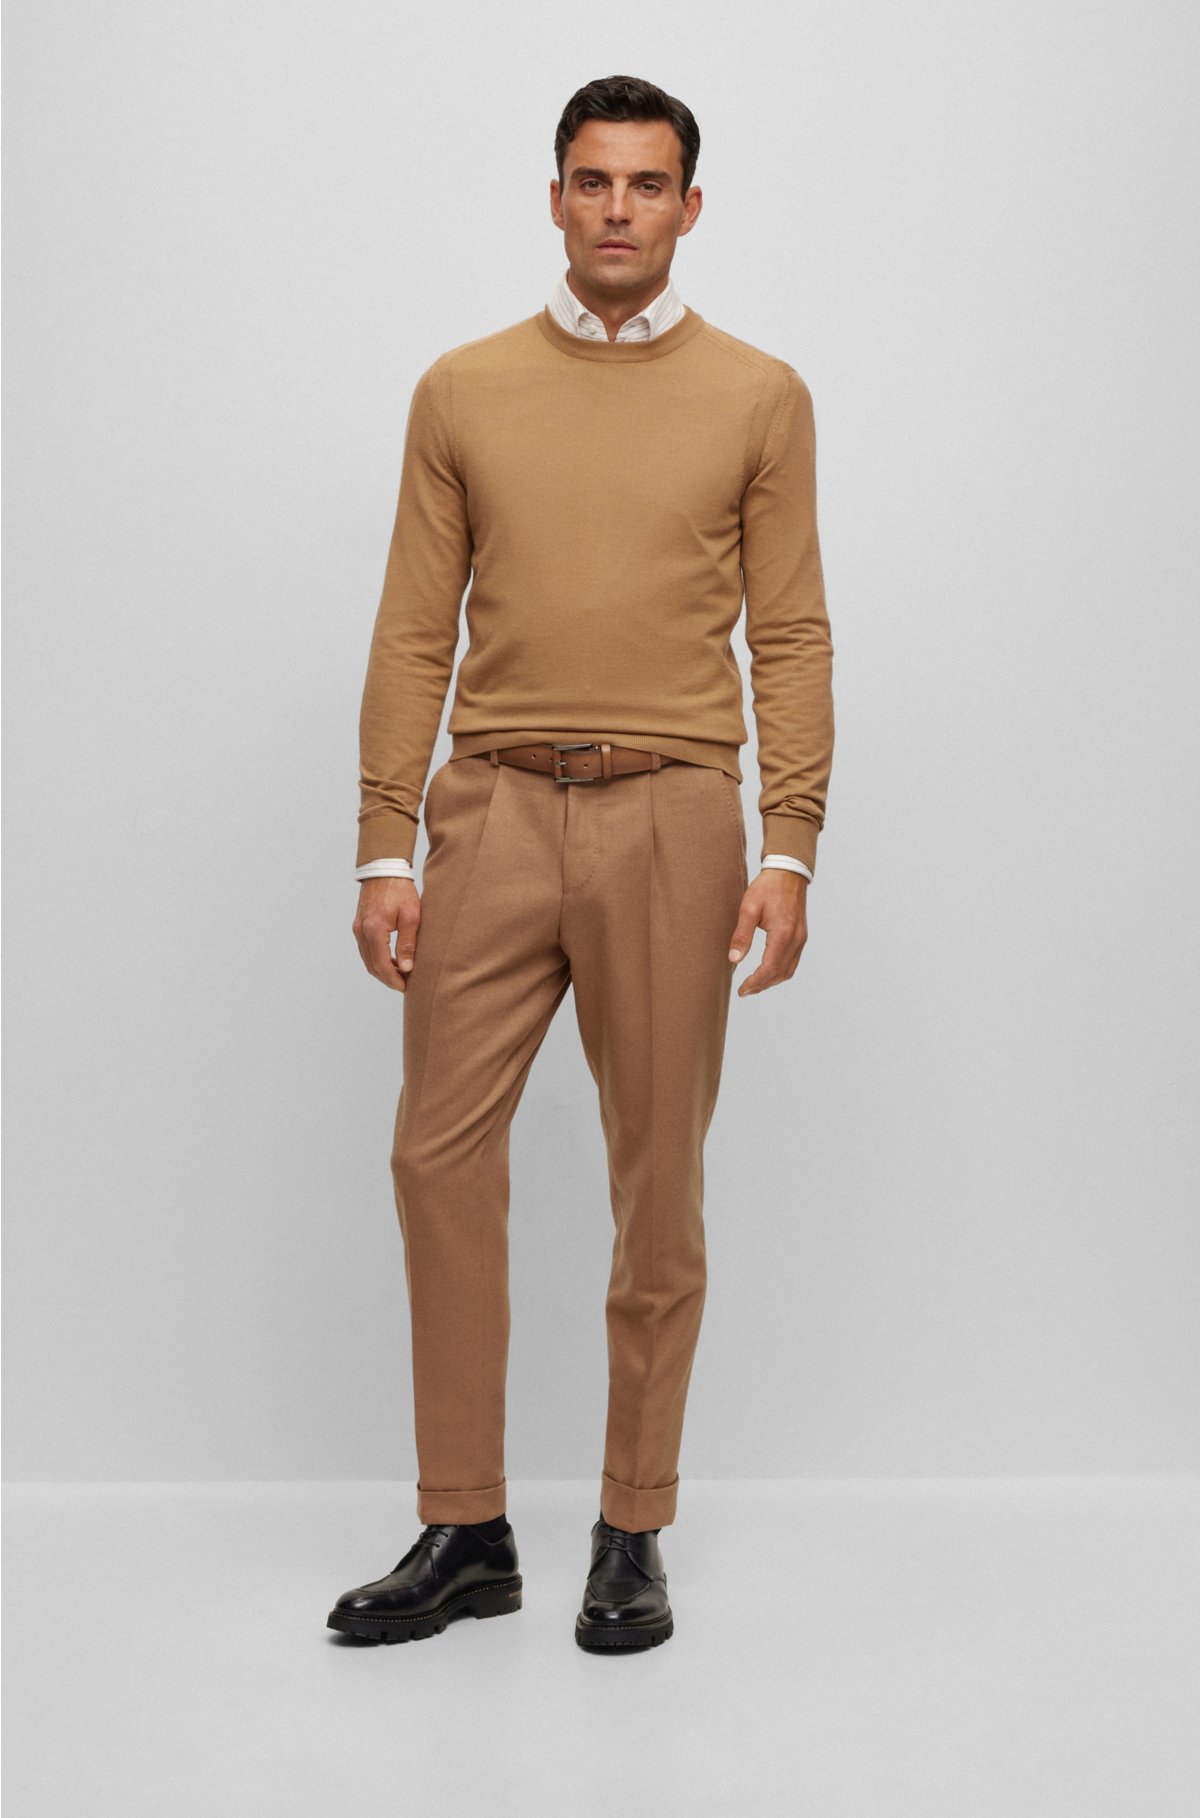 Regular-fit sweater in wool, silk and cashmere, Beige